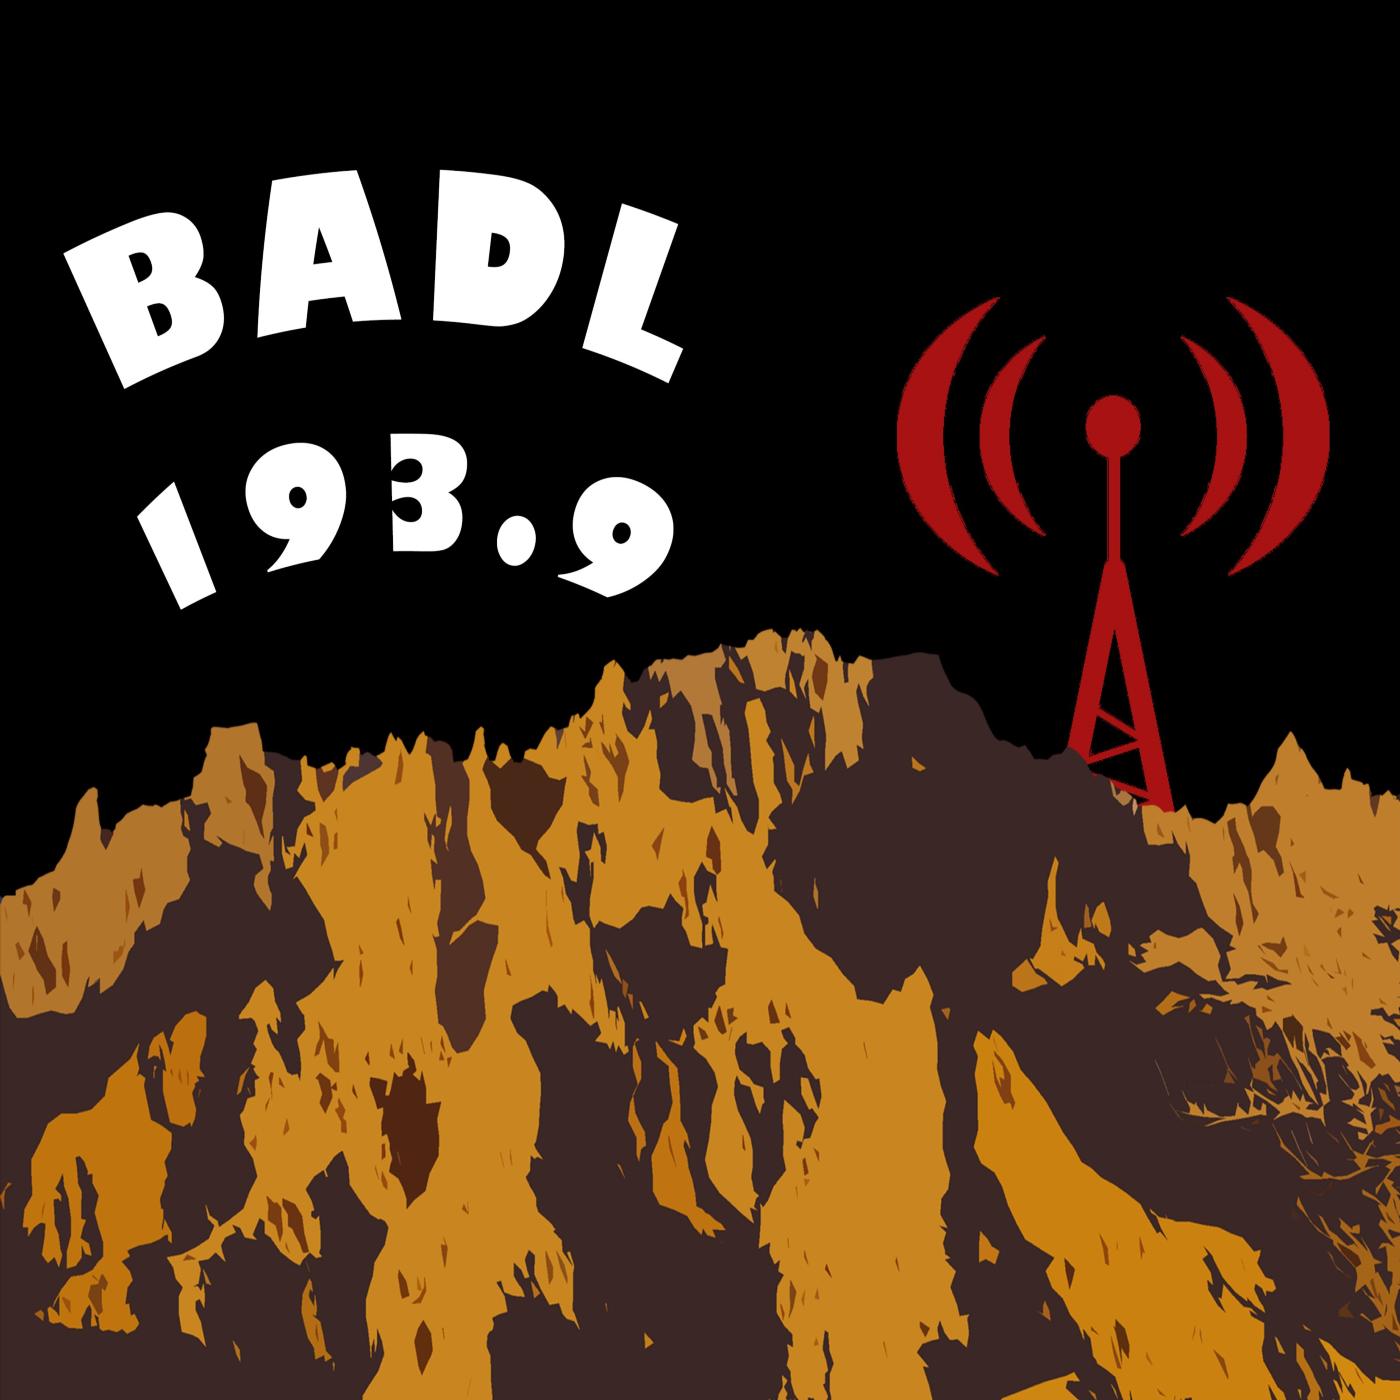 A stylized rendition of badlands formations with red radio tower and text BADL 193.9